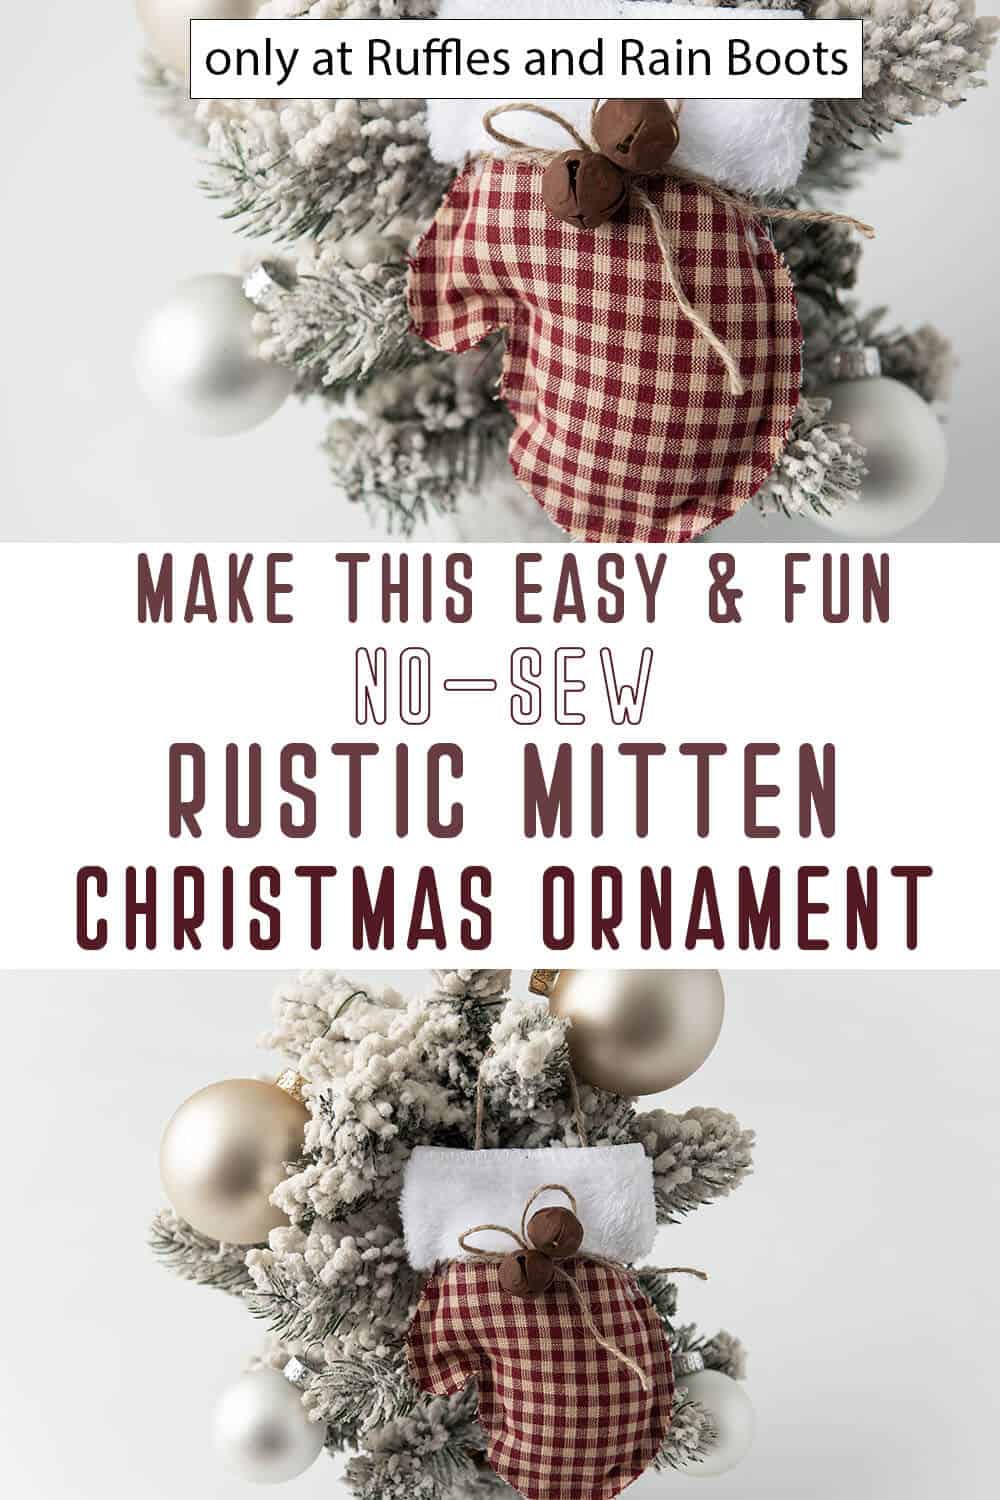 photo collage of no-sew rustic mitten ornament with text which reads make this easy & fun no-sew rustic mitten christmas ornament